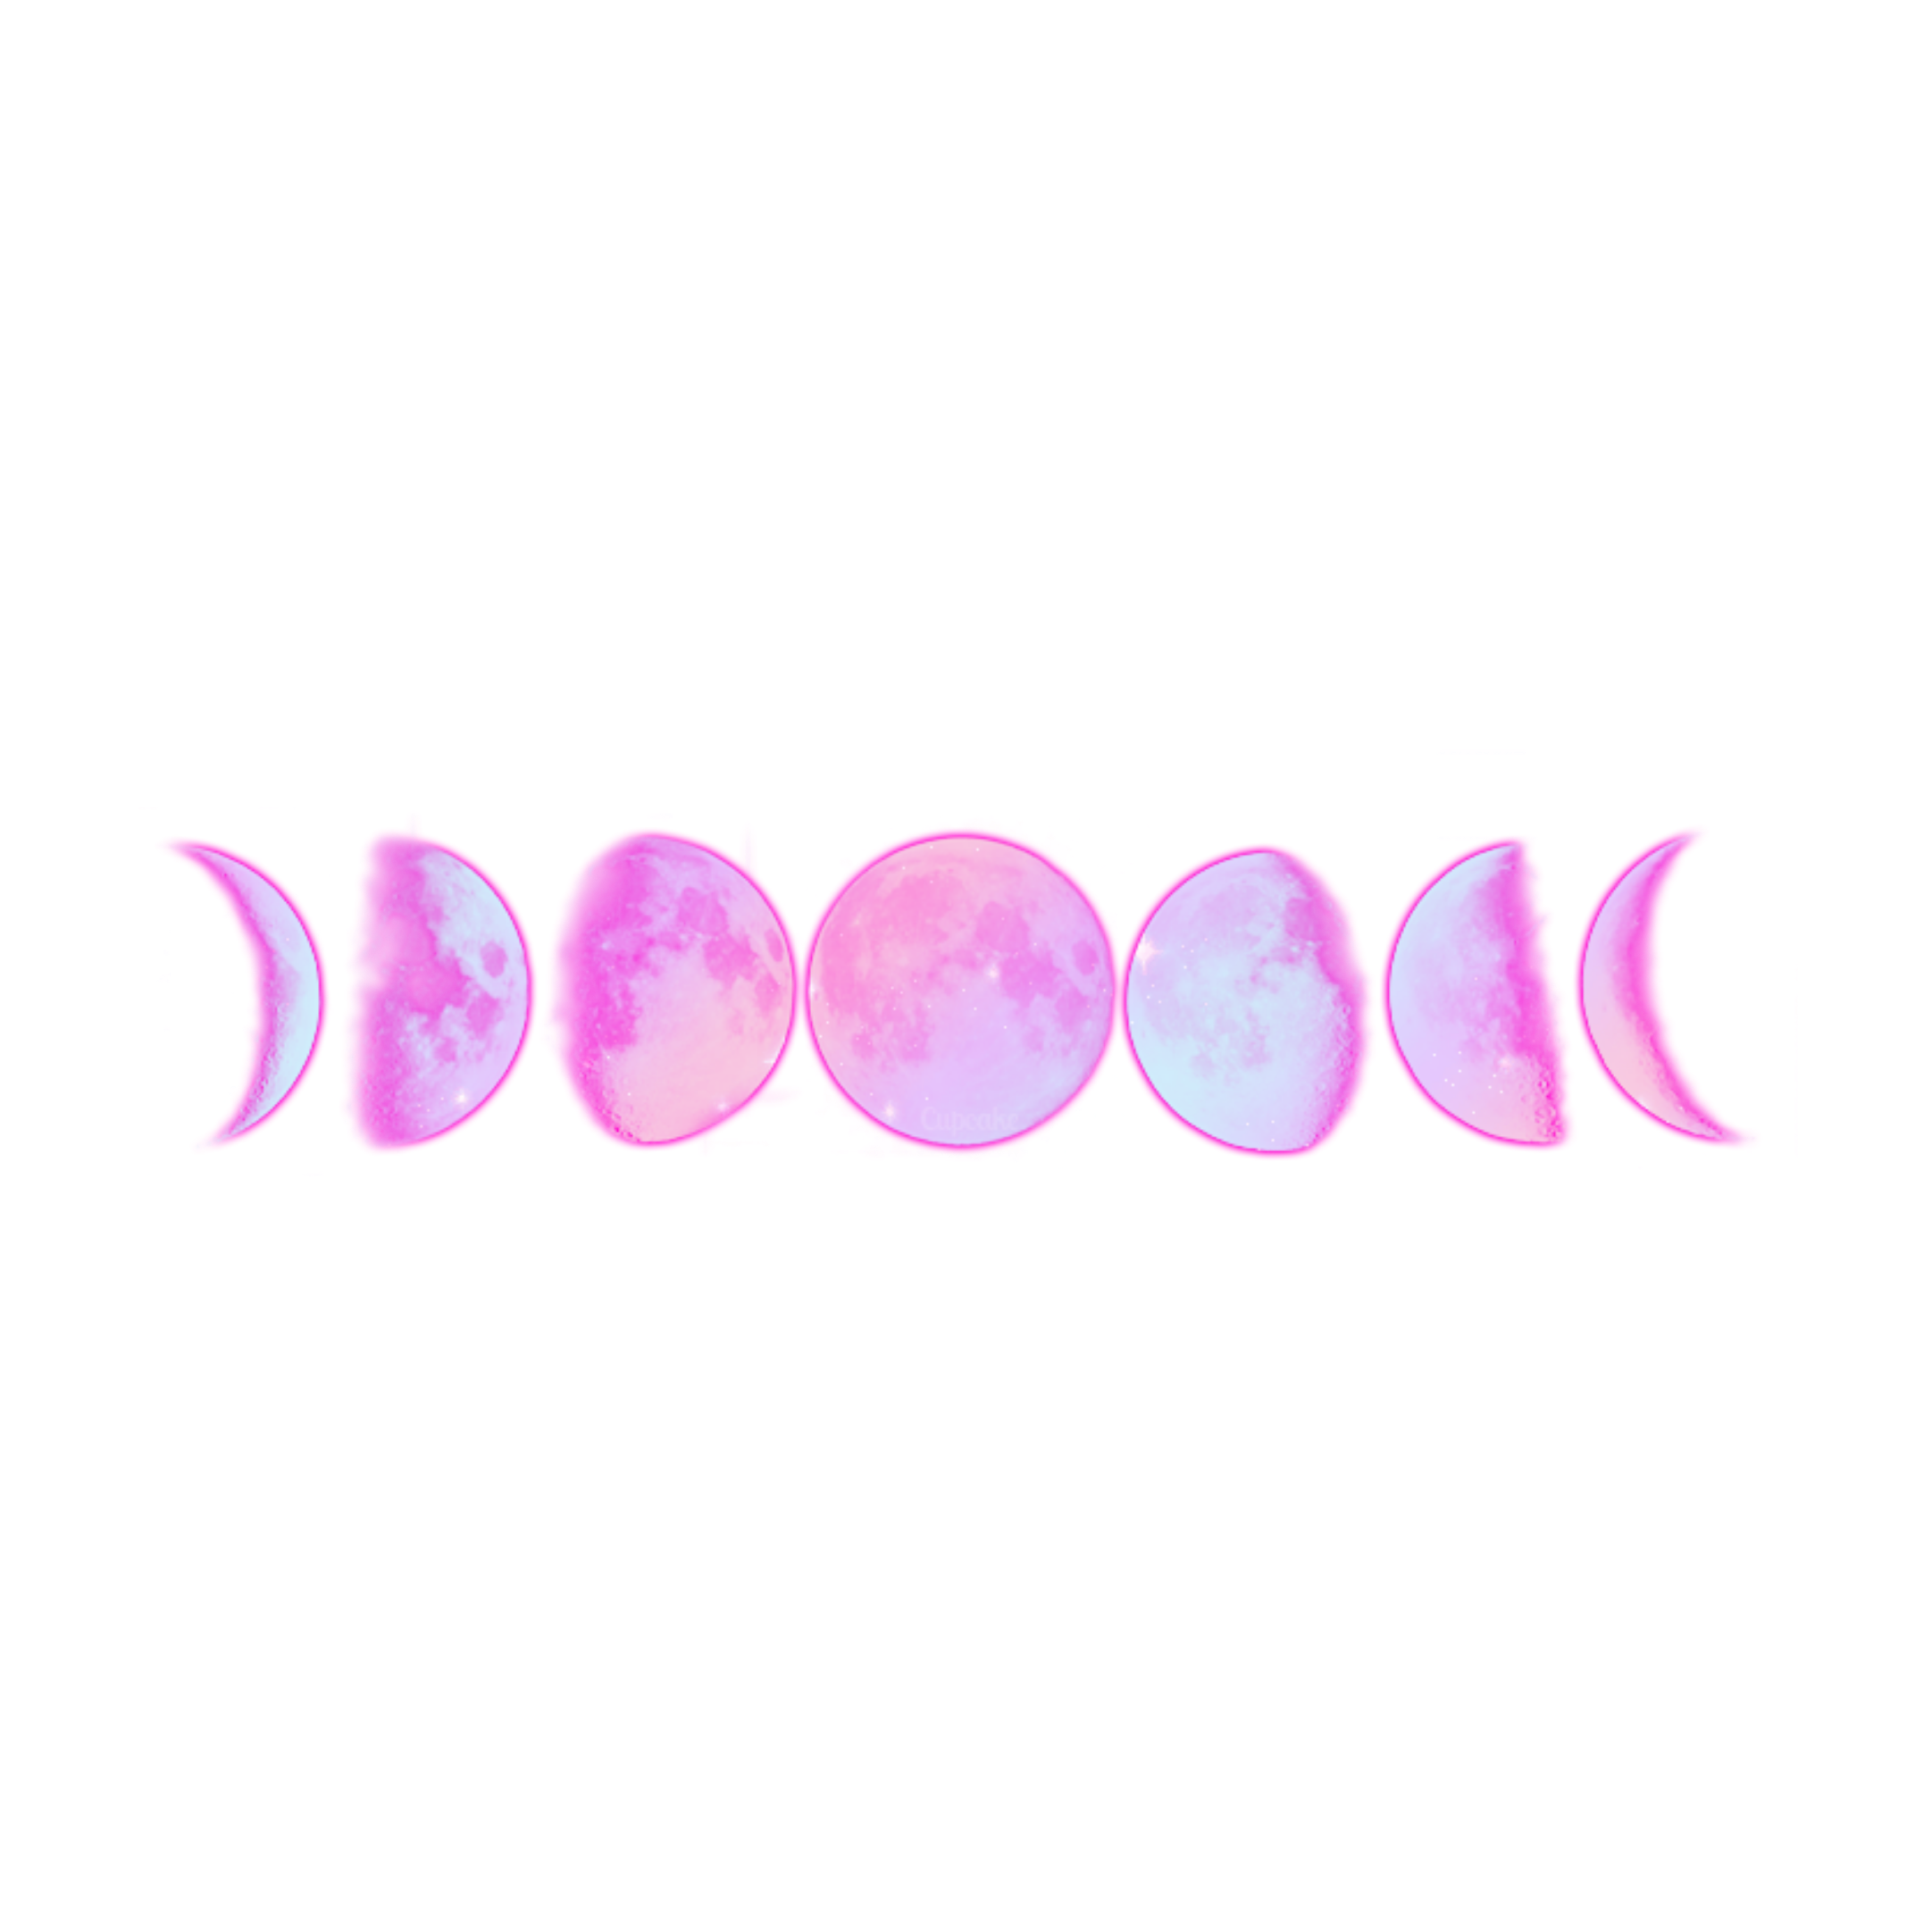 moonphases freetoedit sticker by @amethystprincess216